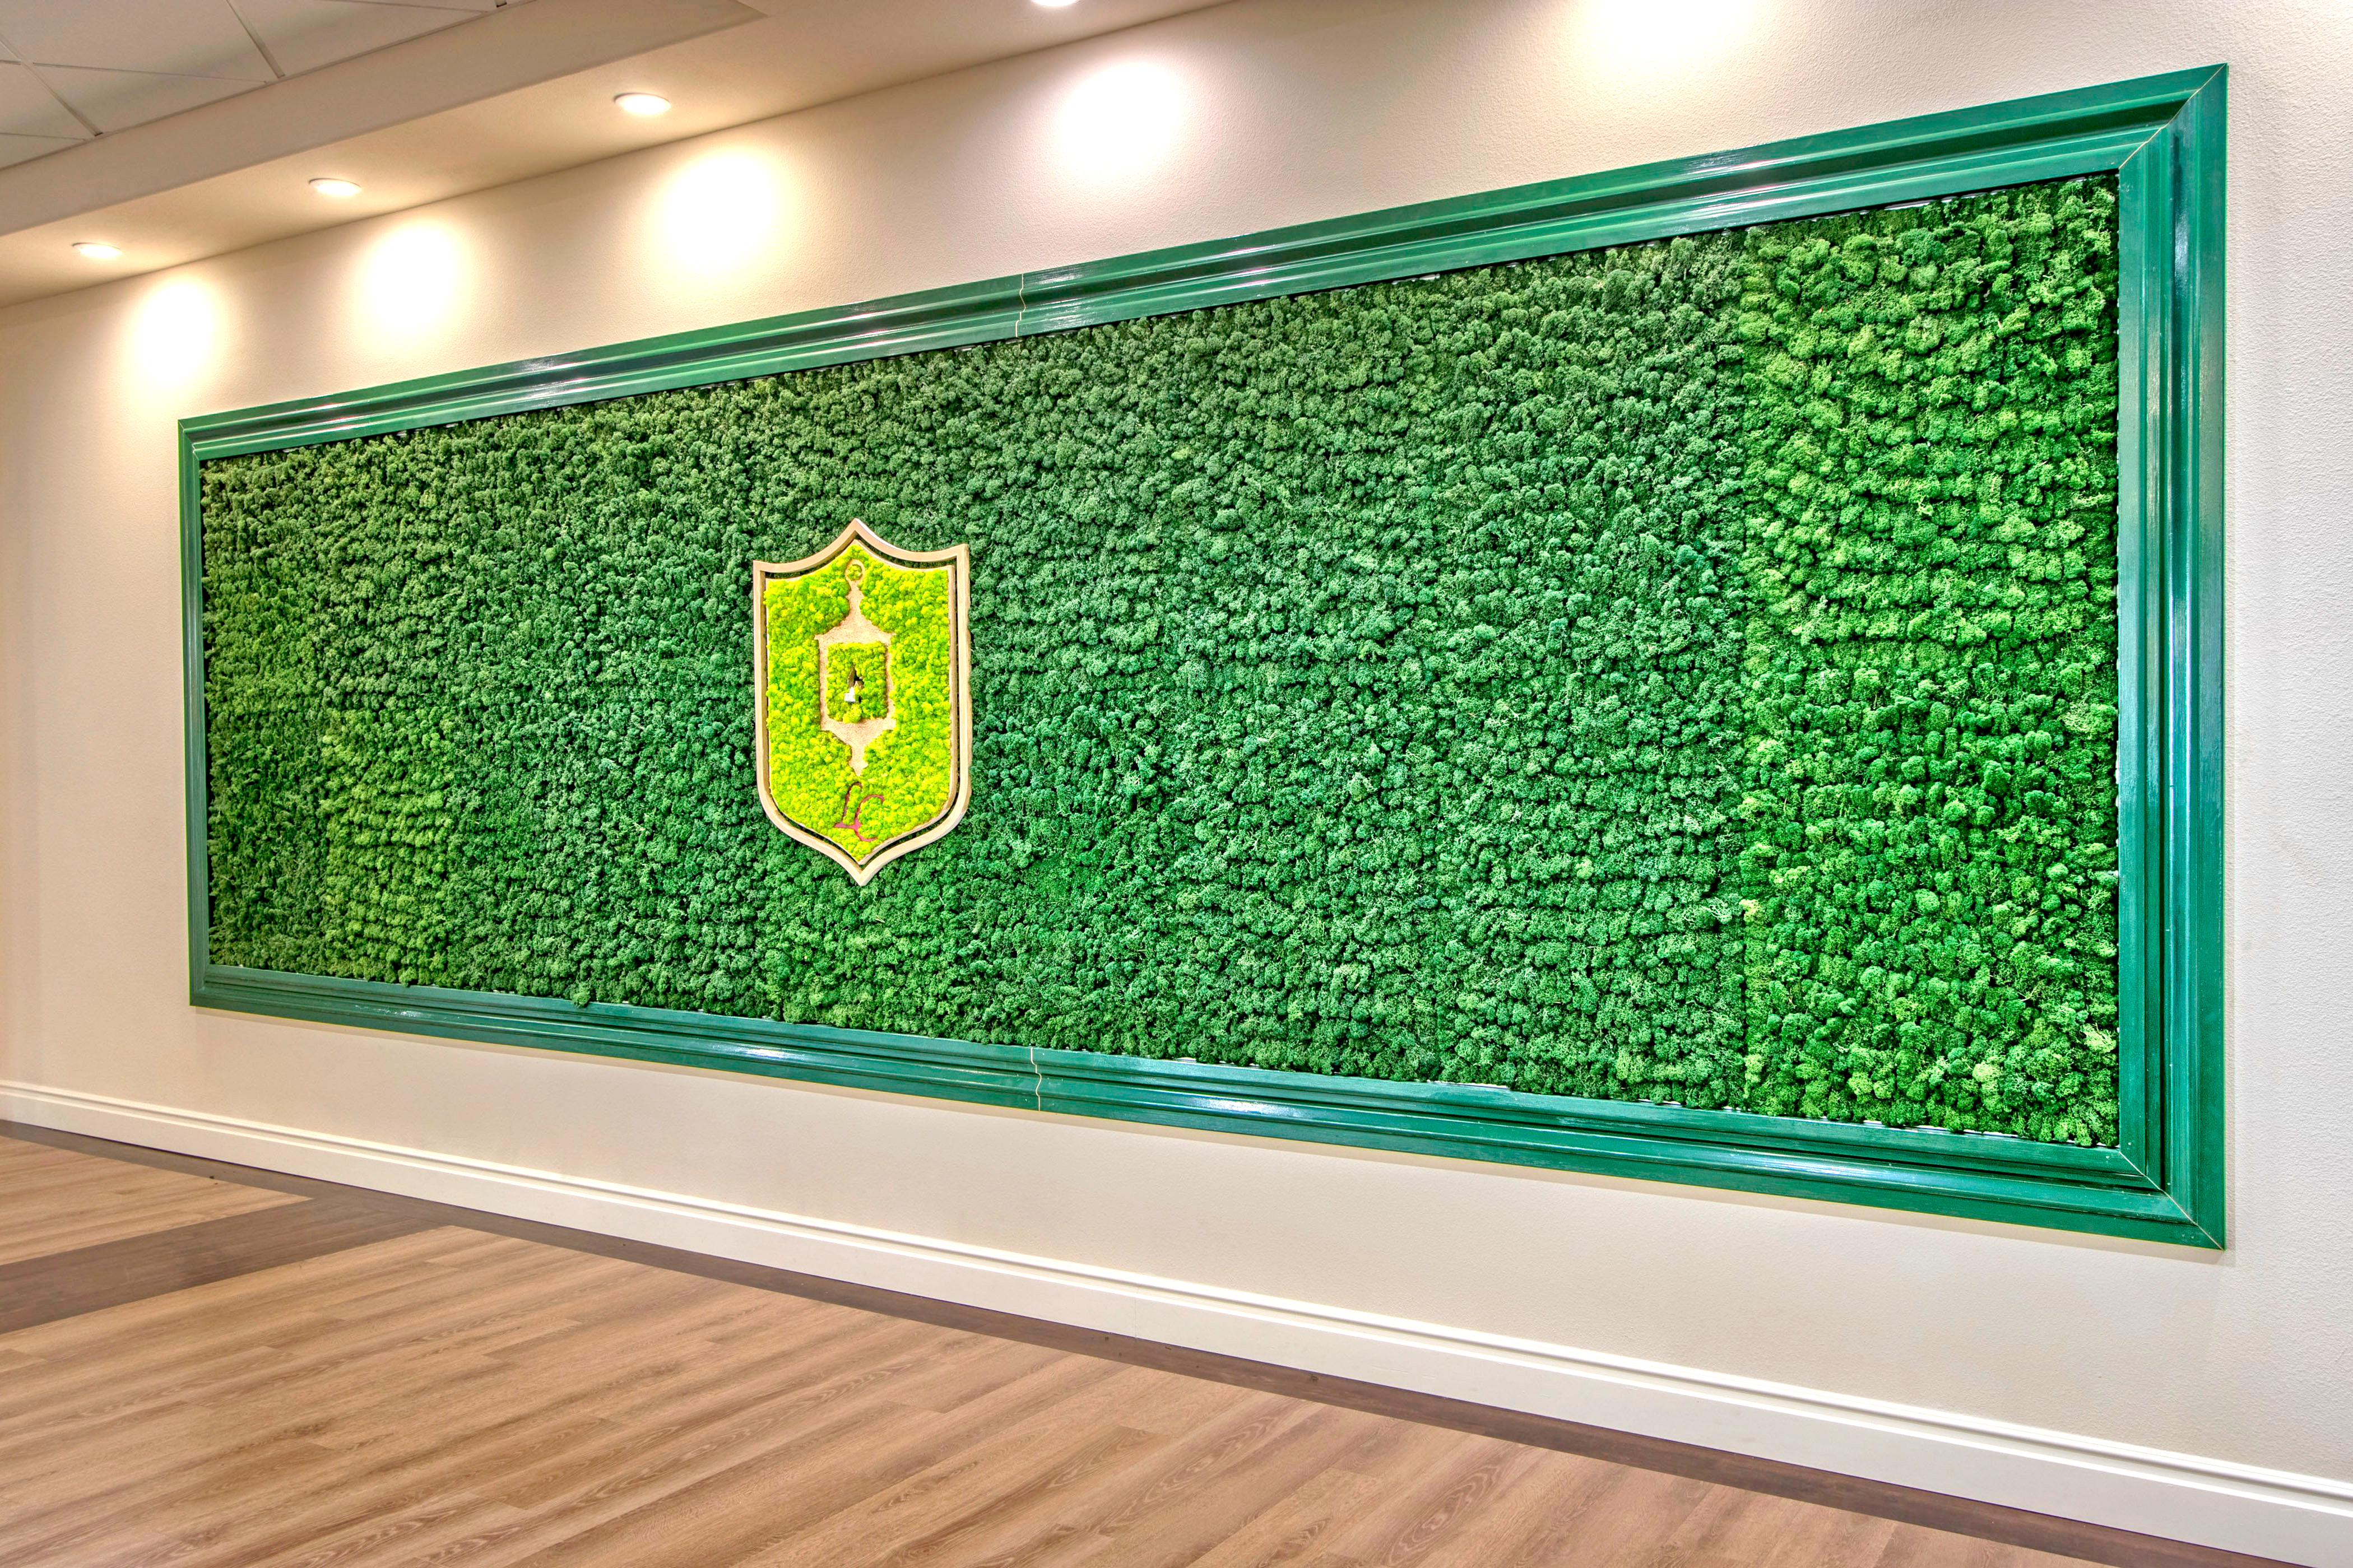 A living moss wall with Lantern Crest's insignia in the middle